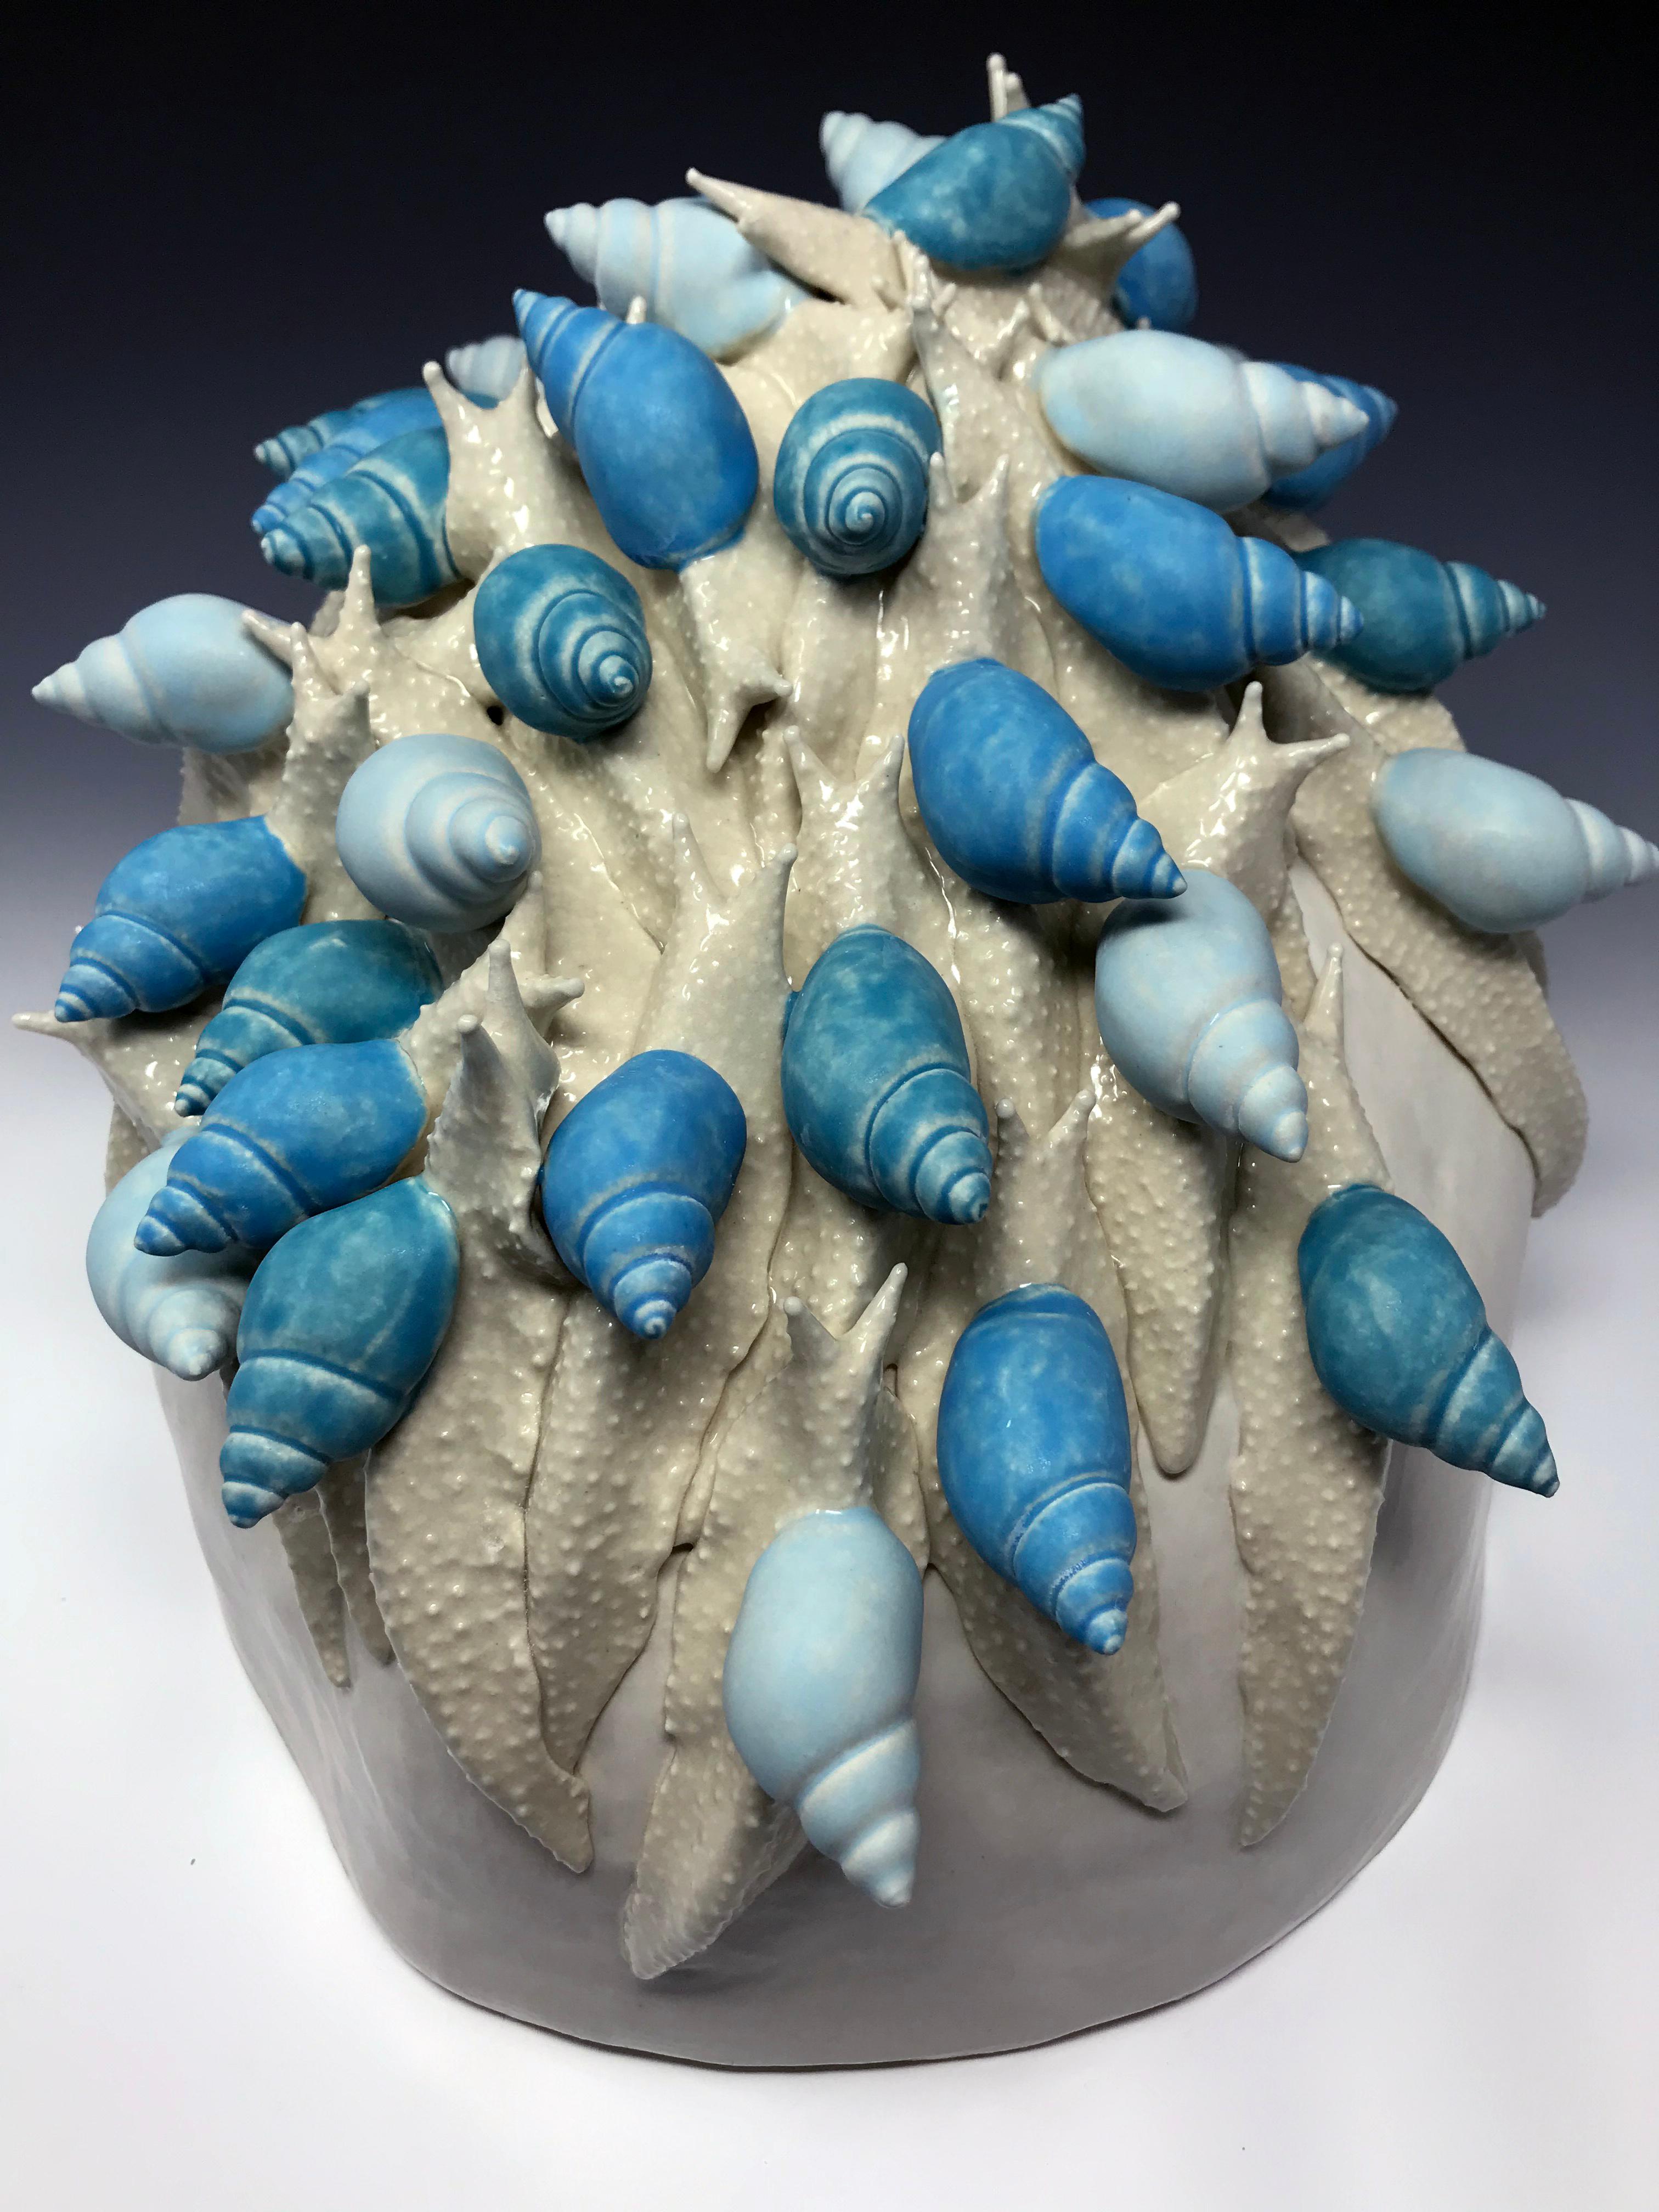 Congregation, snail pile in blue  - Sculpture by Bethany Krull